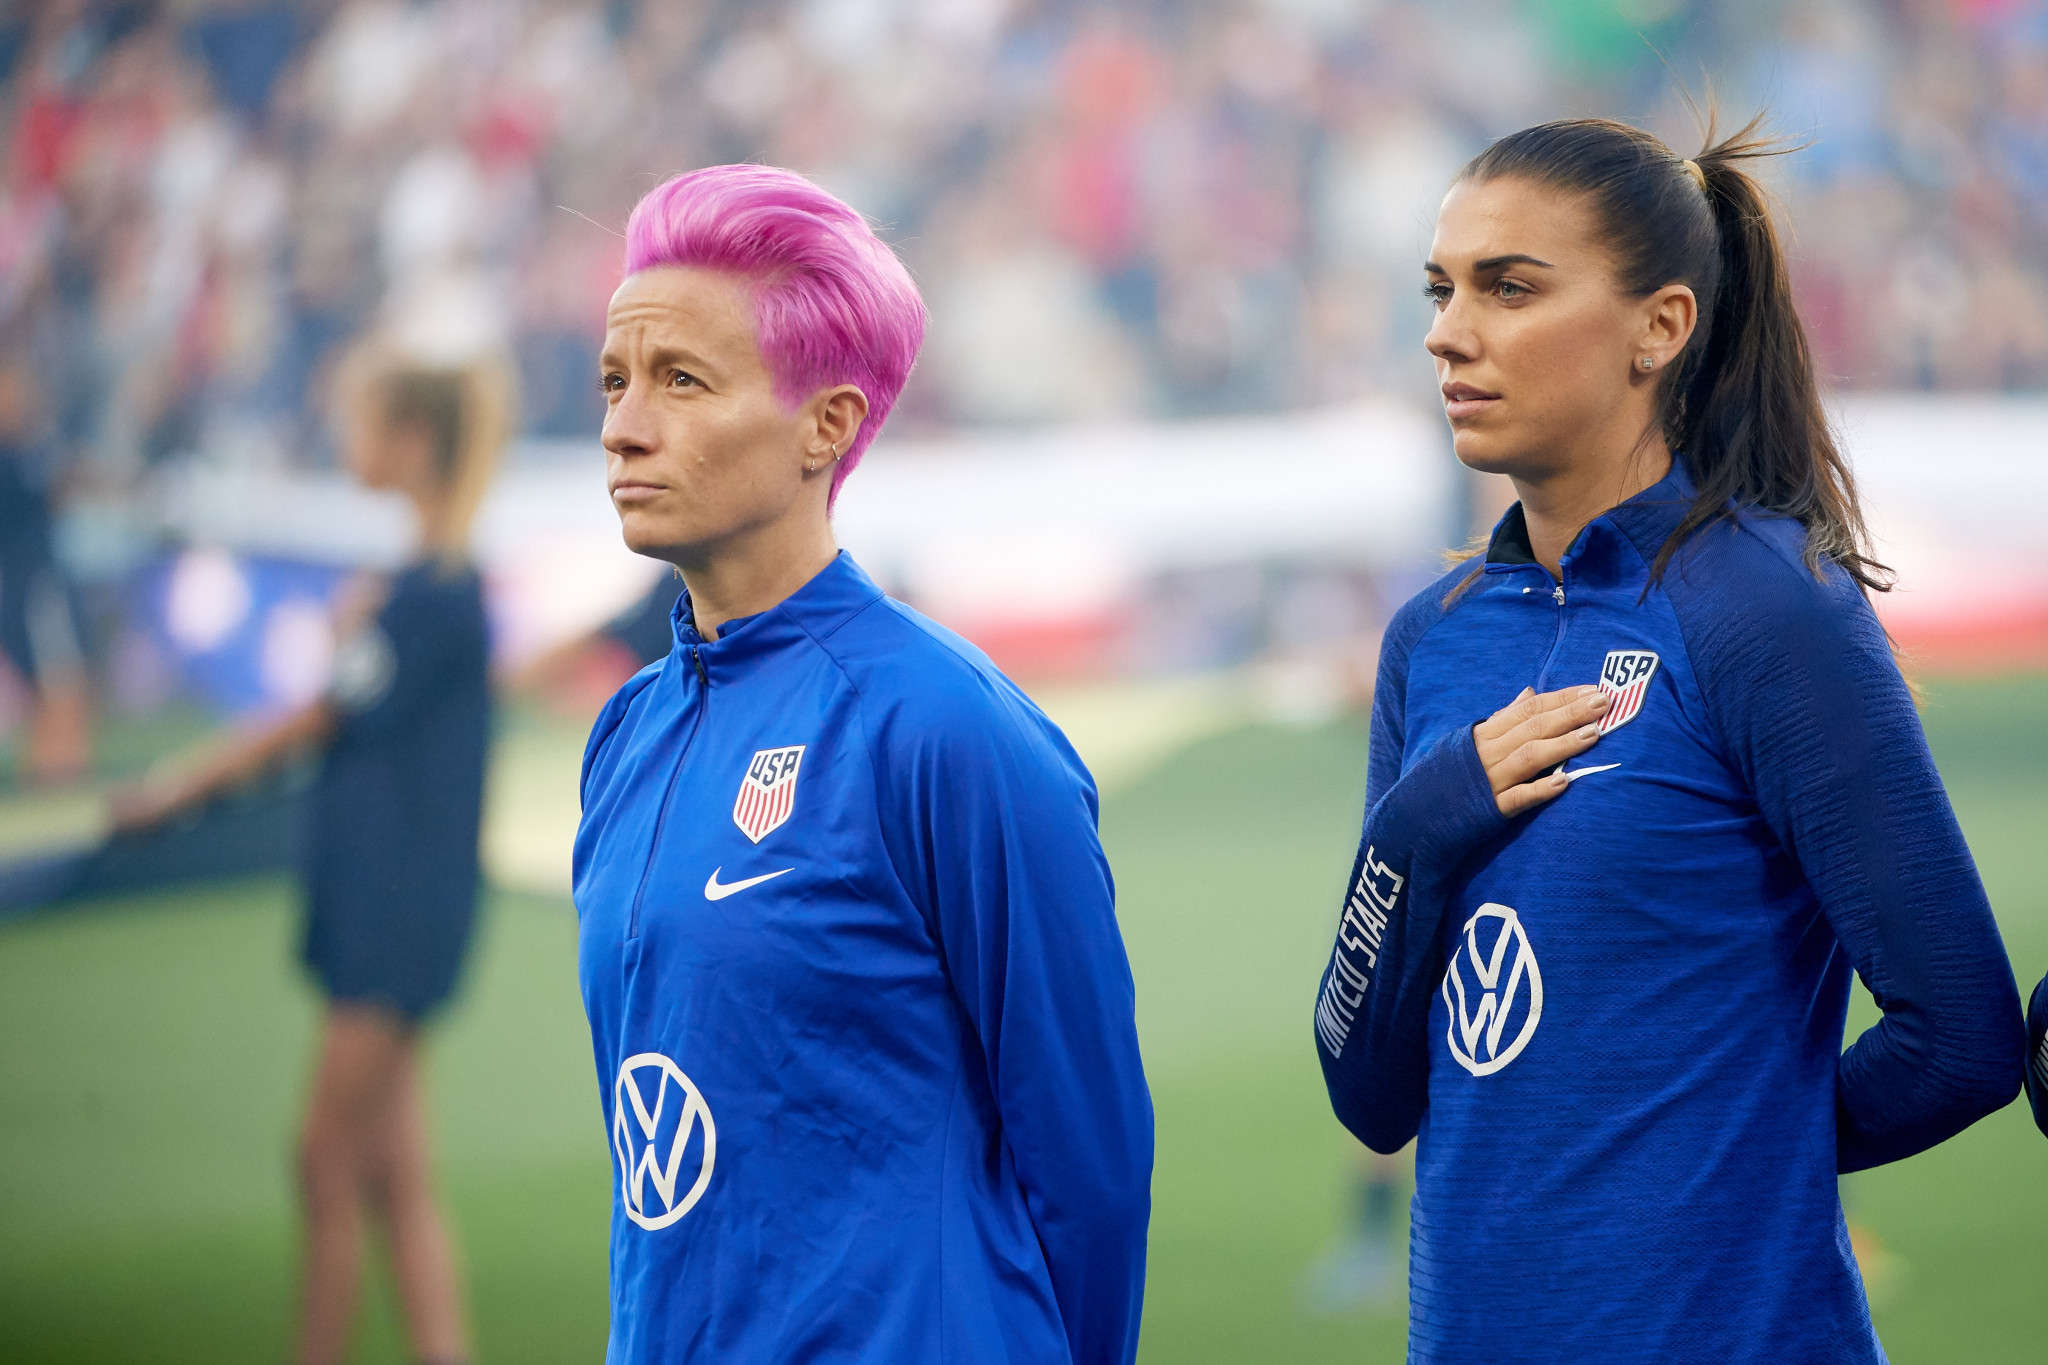 Megan Rapinoe has refused to sing the United States national anthem since 2016 ©Getty Images